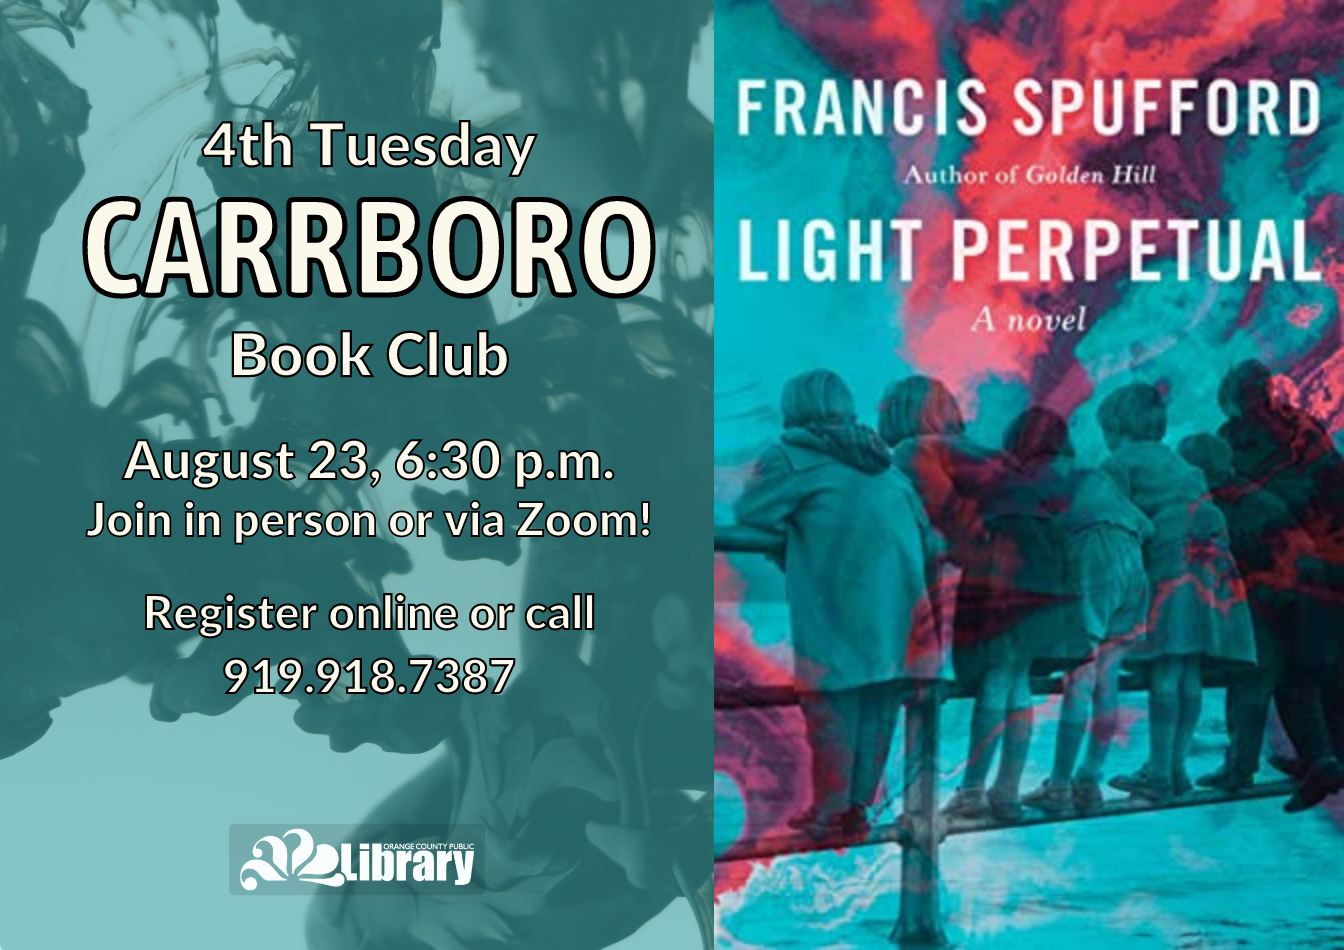 A blue flyer with the cover of this month's book, Light Perpetual by Francis Spufford. The cover features several people with their backs to the camera against a blue and red background. Flyer text: Fourth Tuesday Carrboro Book Club. August 23, 6:30 pm. Join in person or via Zoom! Register online or call 919-918-7387.